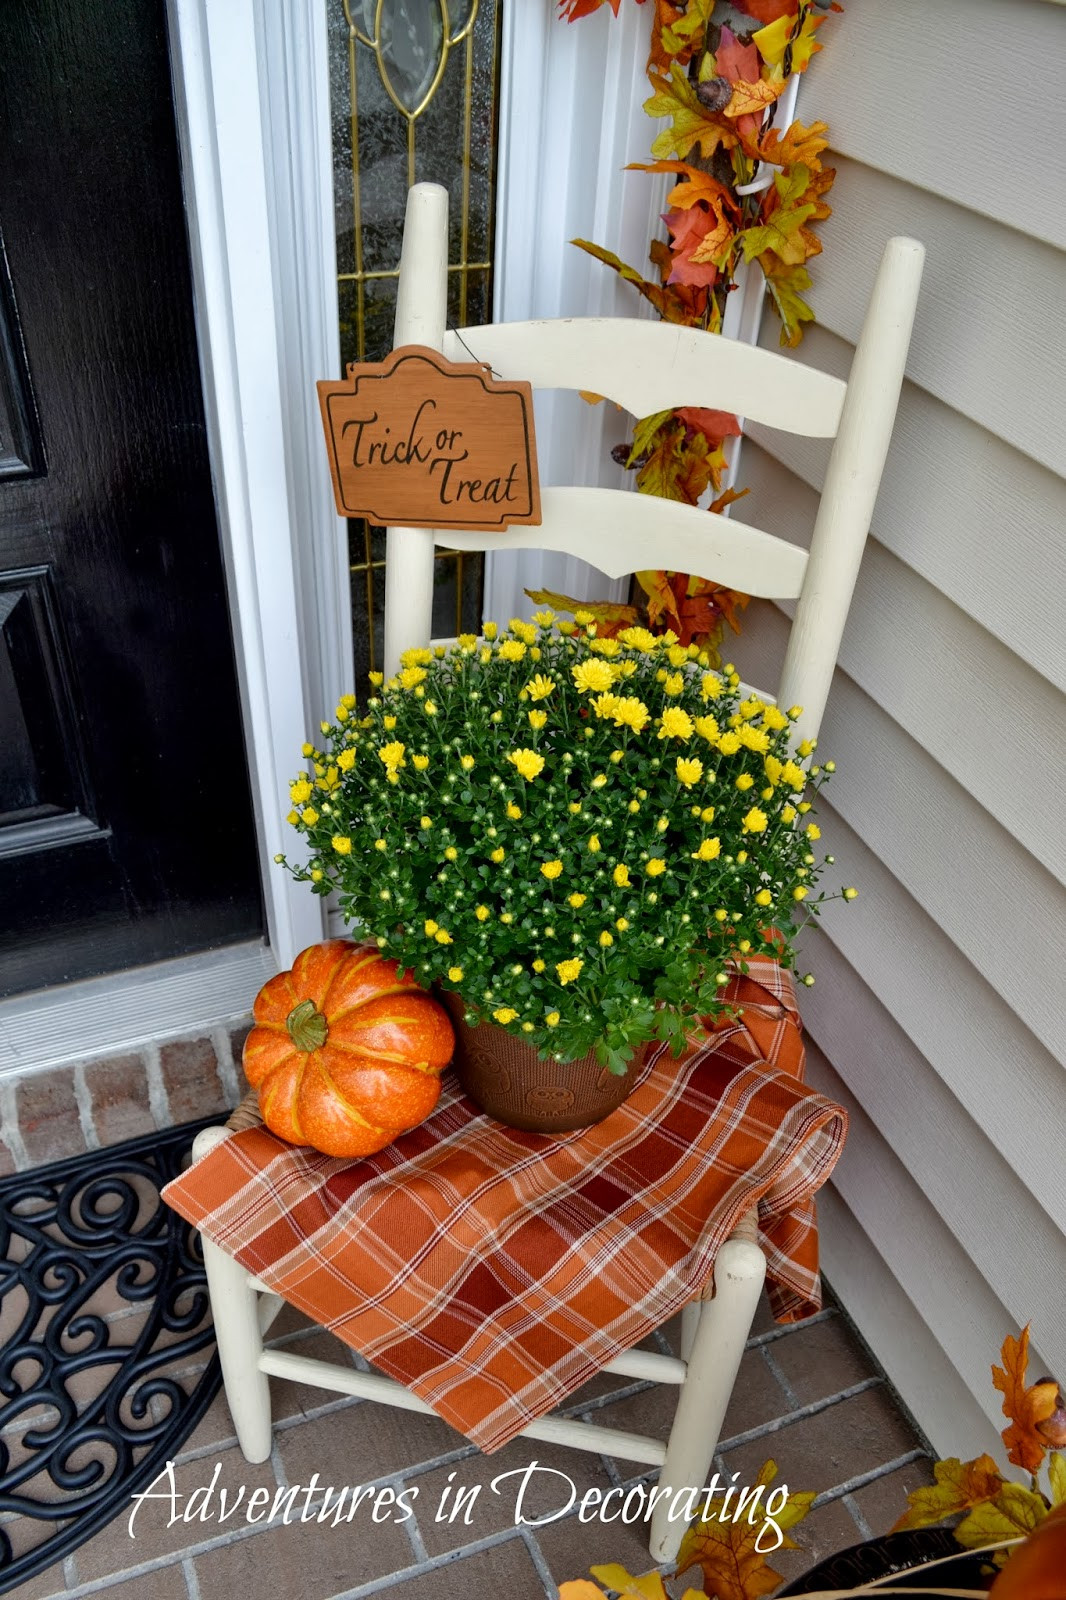 Fall Decorations For Porch
 Adventures in Decorating Our Fall Front Porch